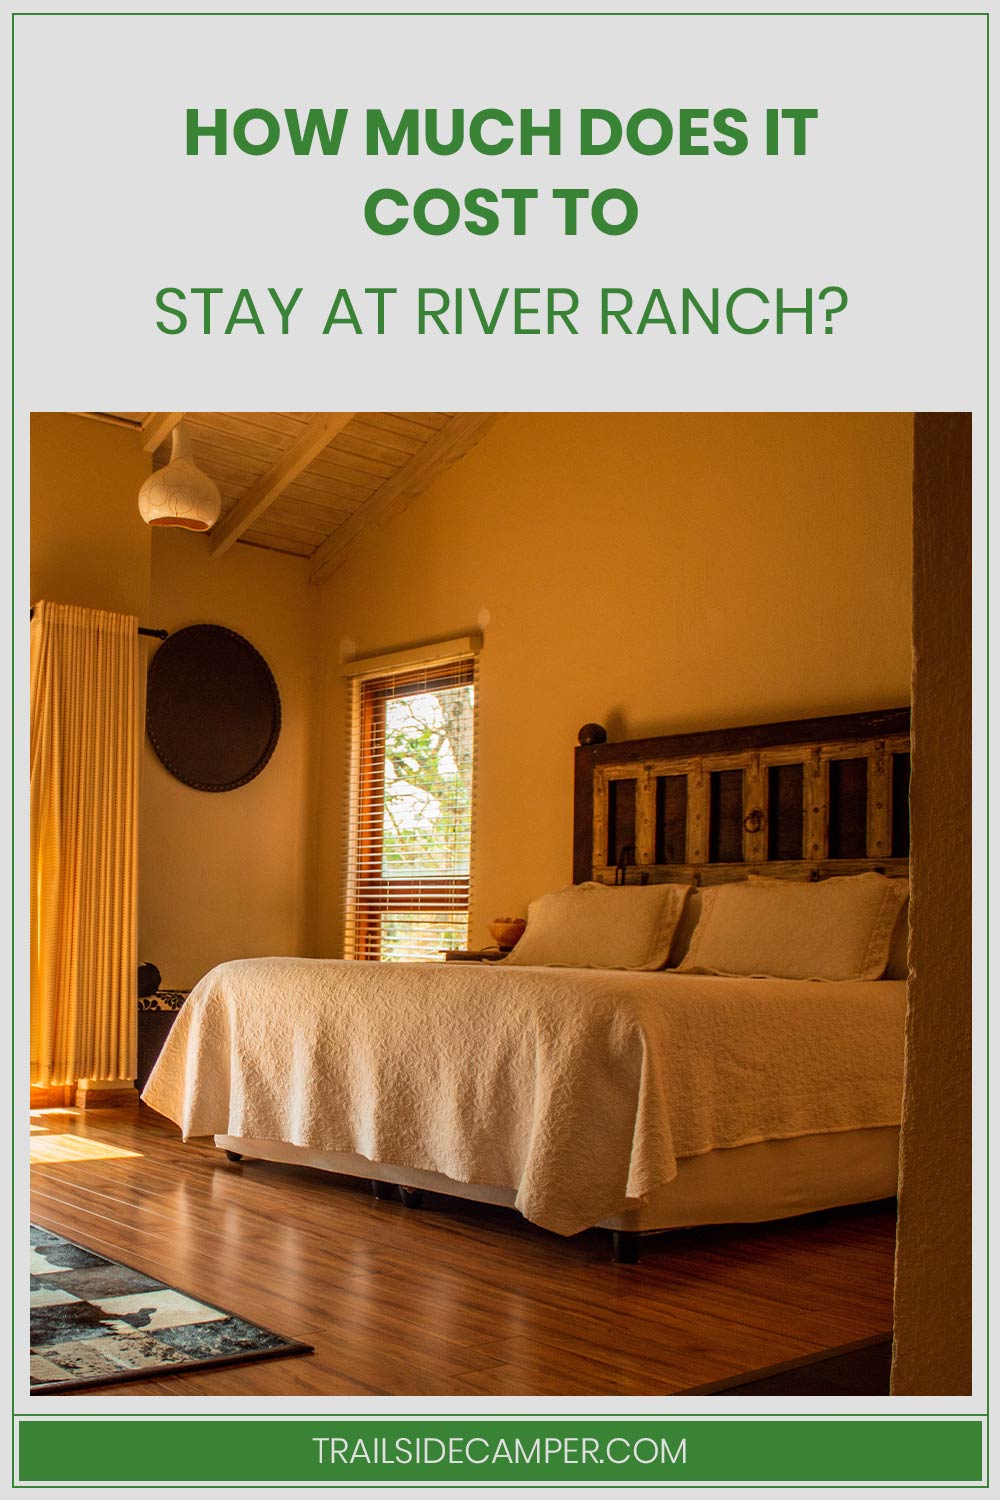 How Much Does It Cost To Stay At River Ranch?